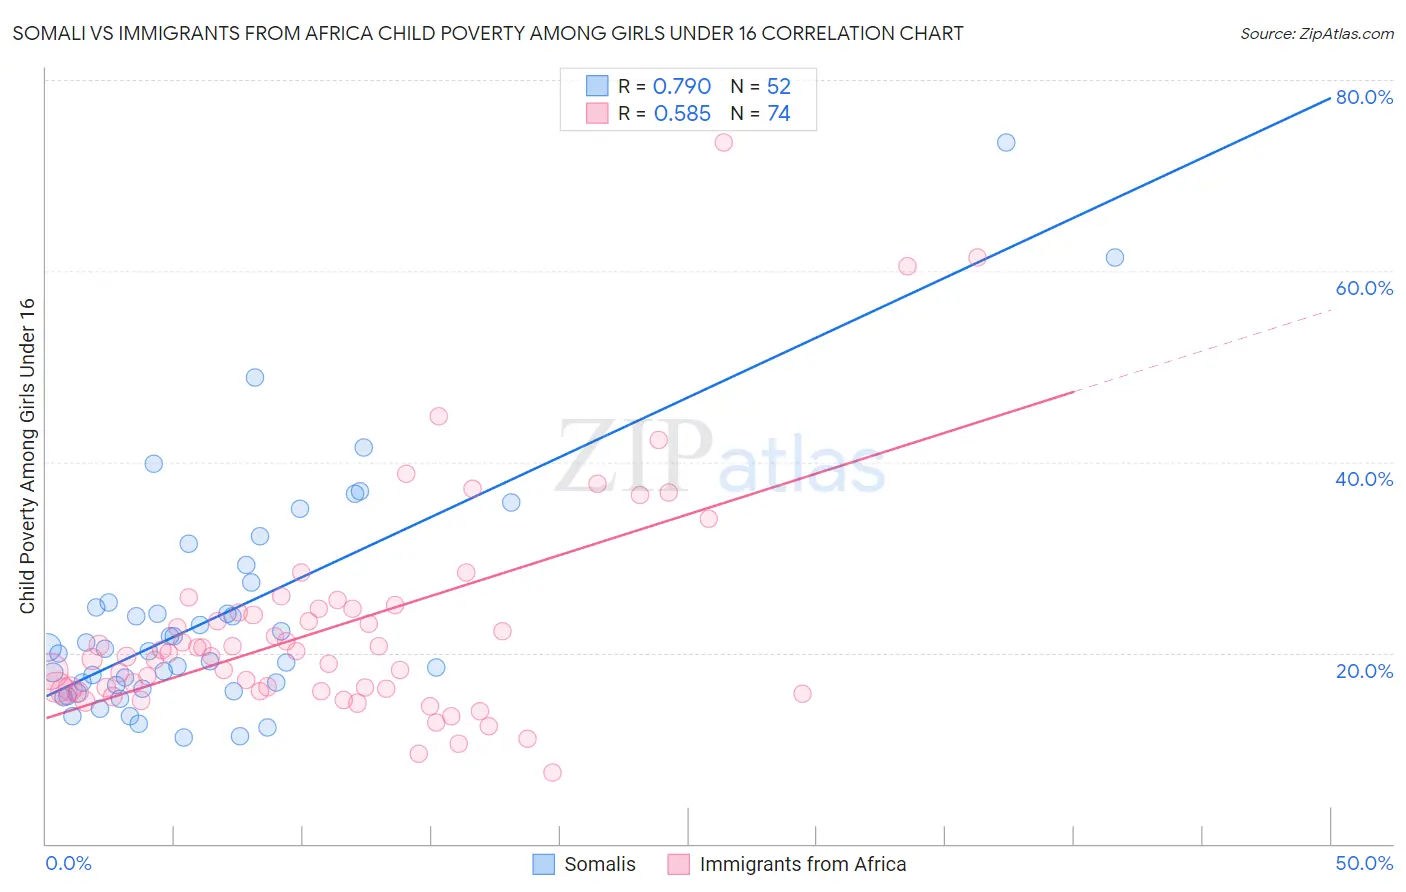 Somali vs Immigrants from Africa Child Poverty Among Girls Under 16